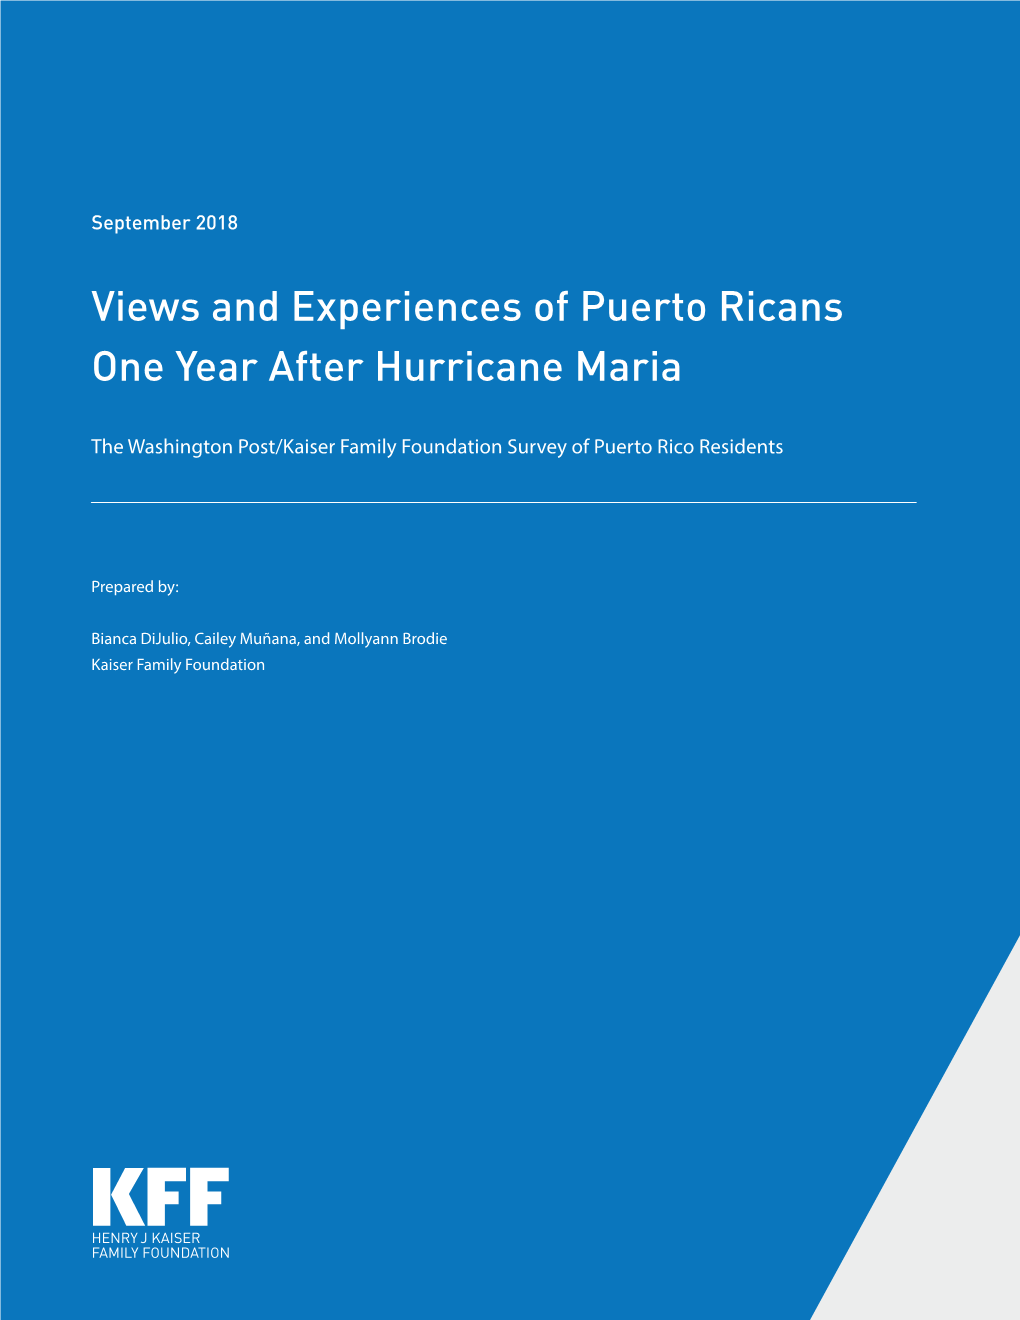 Views and Experiences of Puerto Ricans One Year After Hurricane Maria